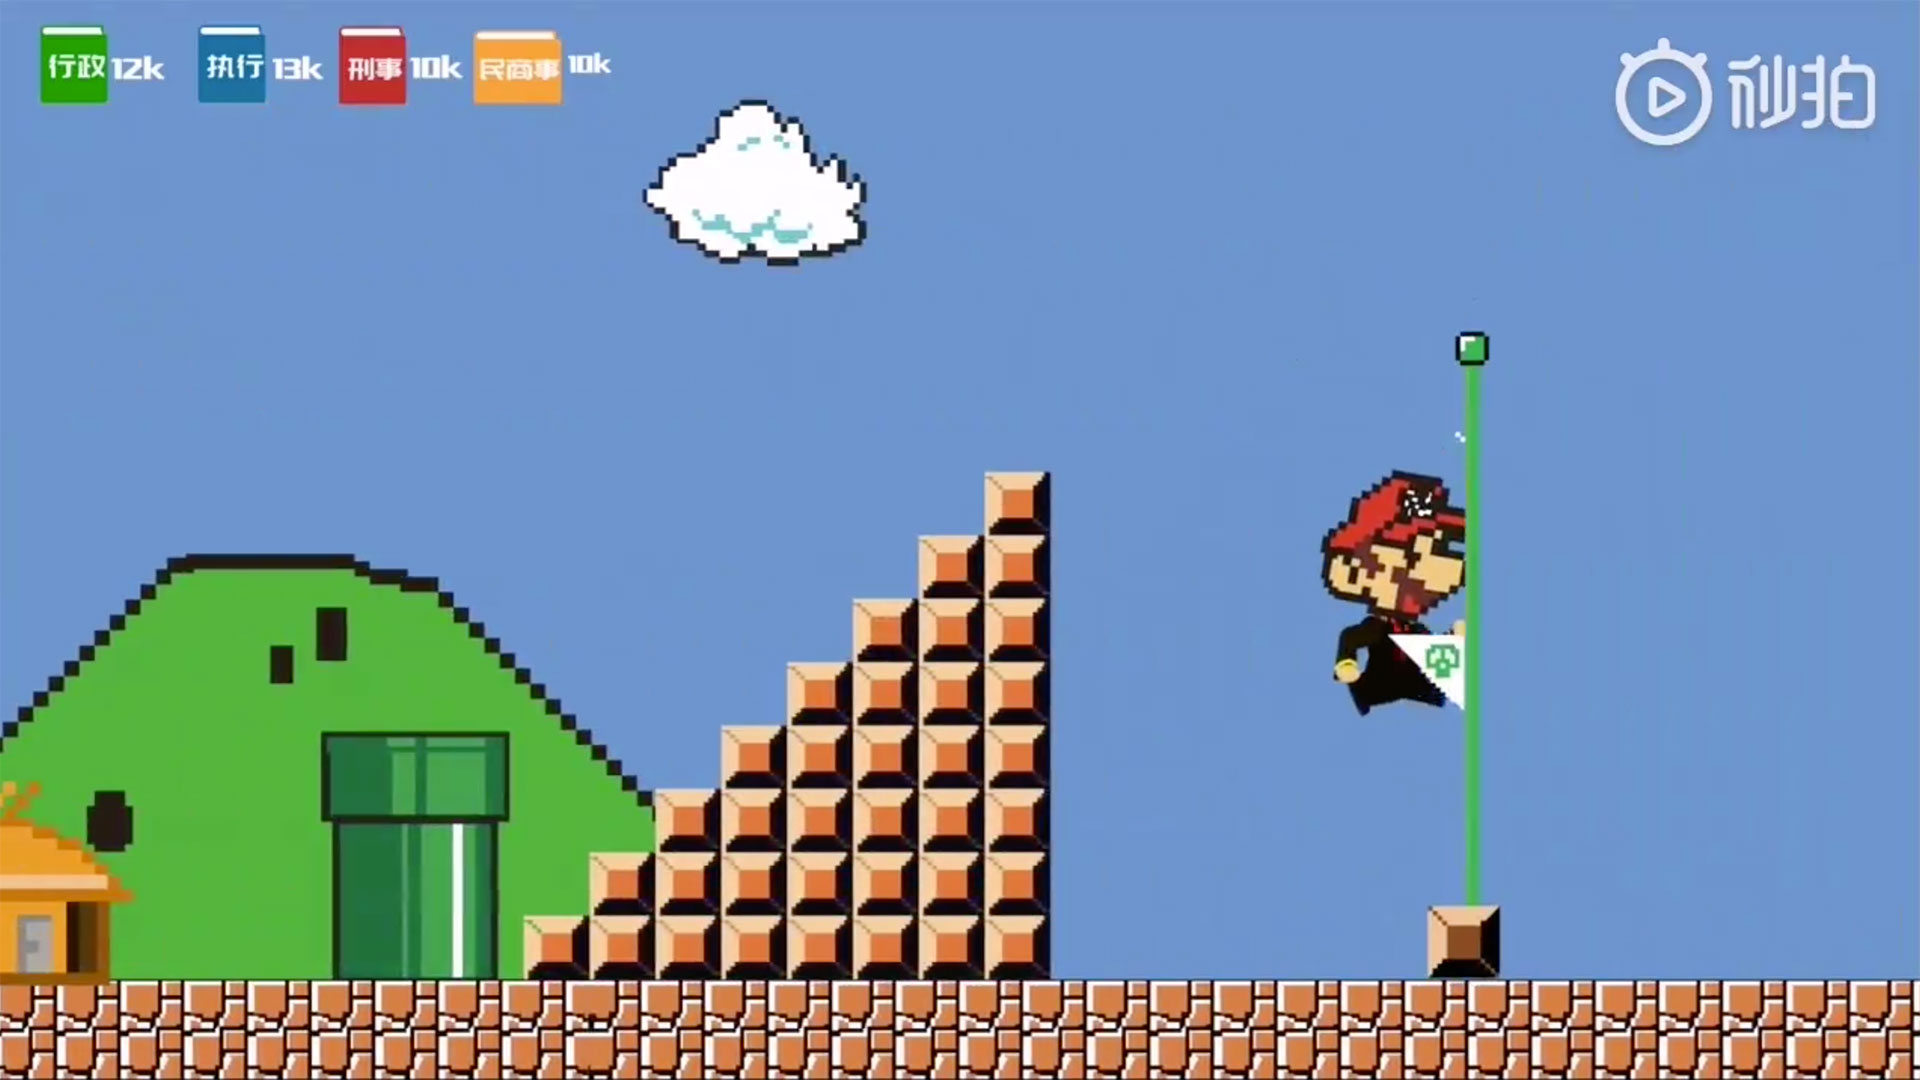 The flagpole and some of the background sprites appear to be taken directly from Super Mario Bros. You can tell Mario isn't because he's incredibly ugly. (Picture: @ChineseNintendo)